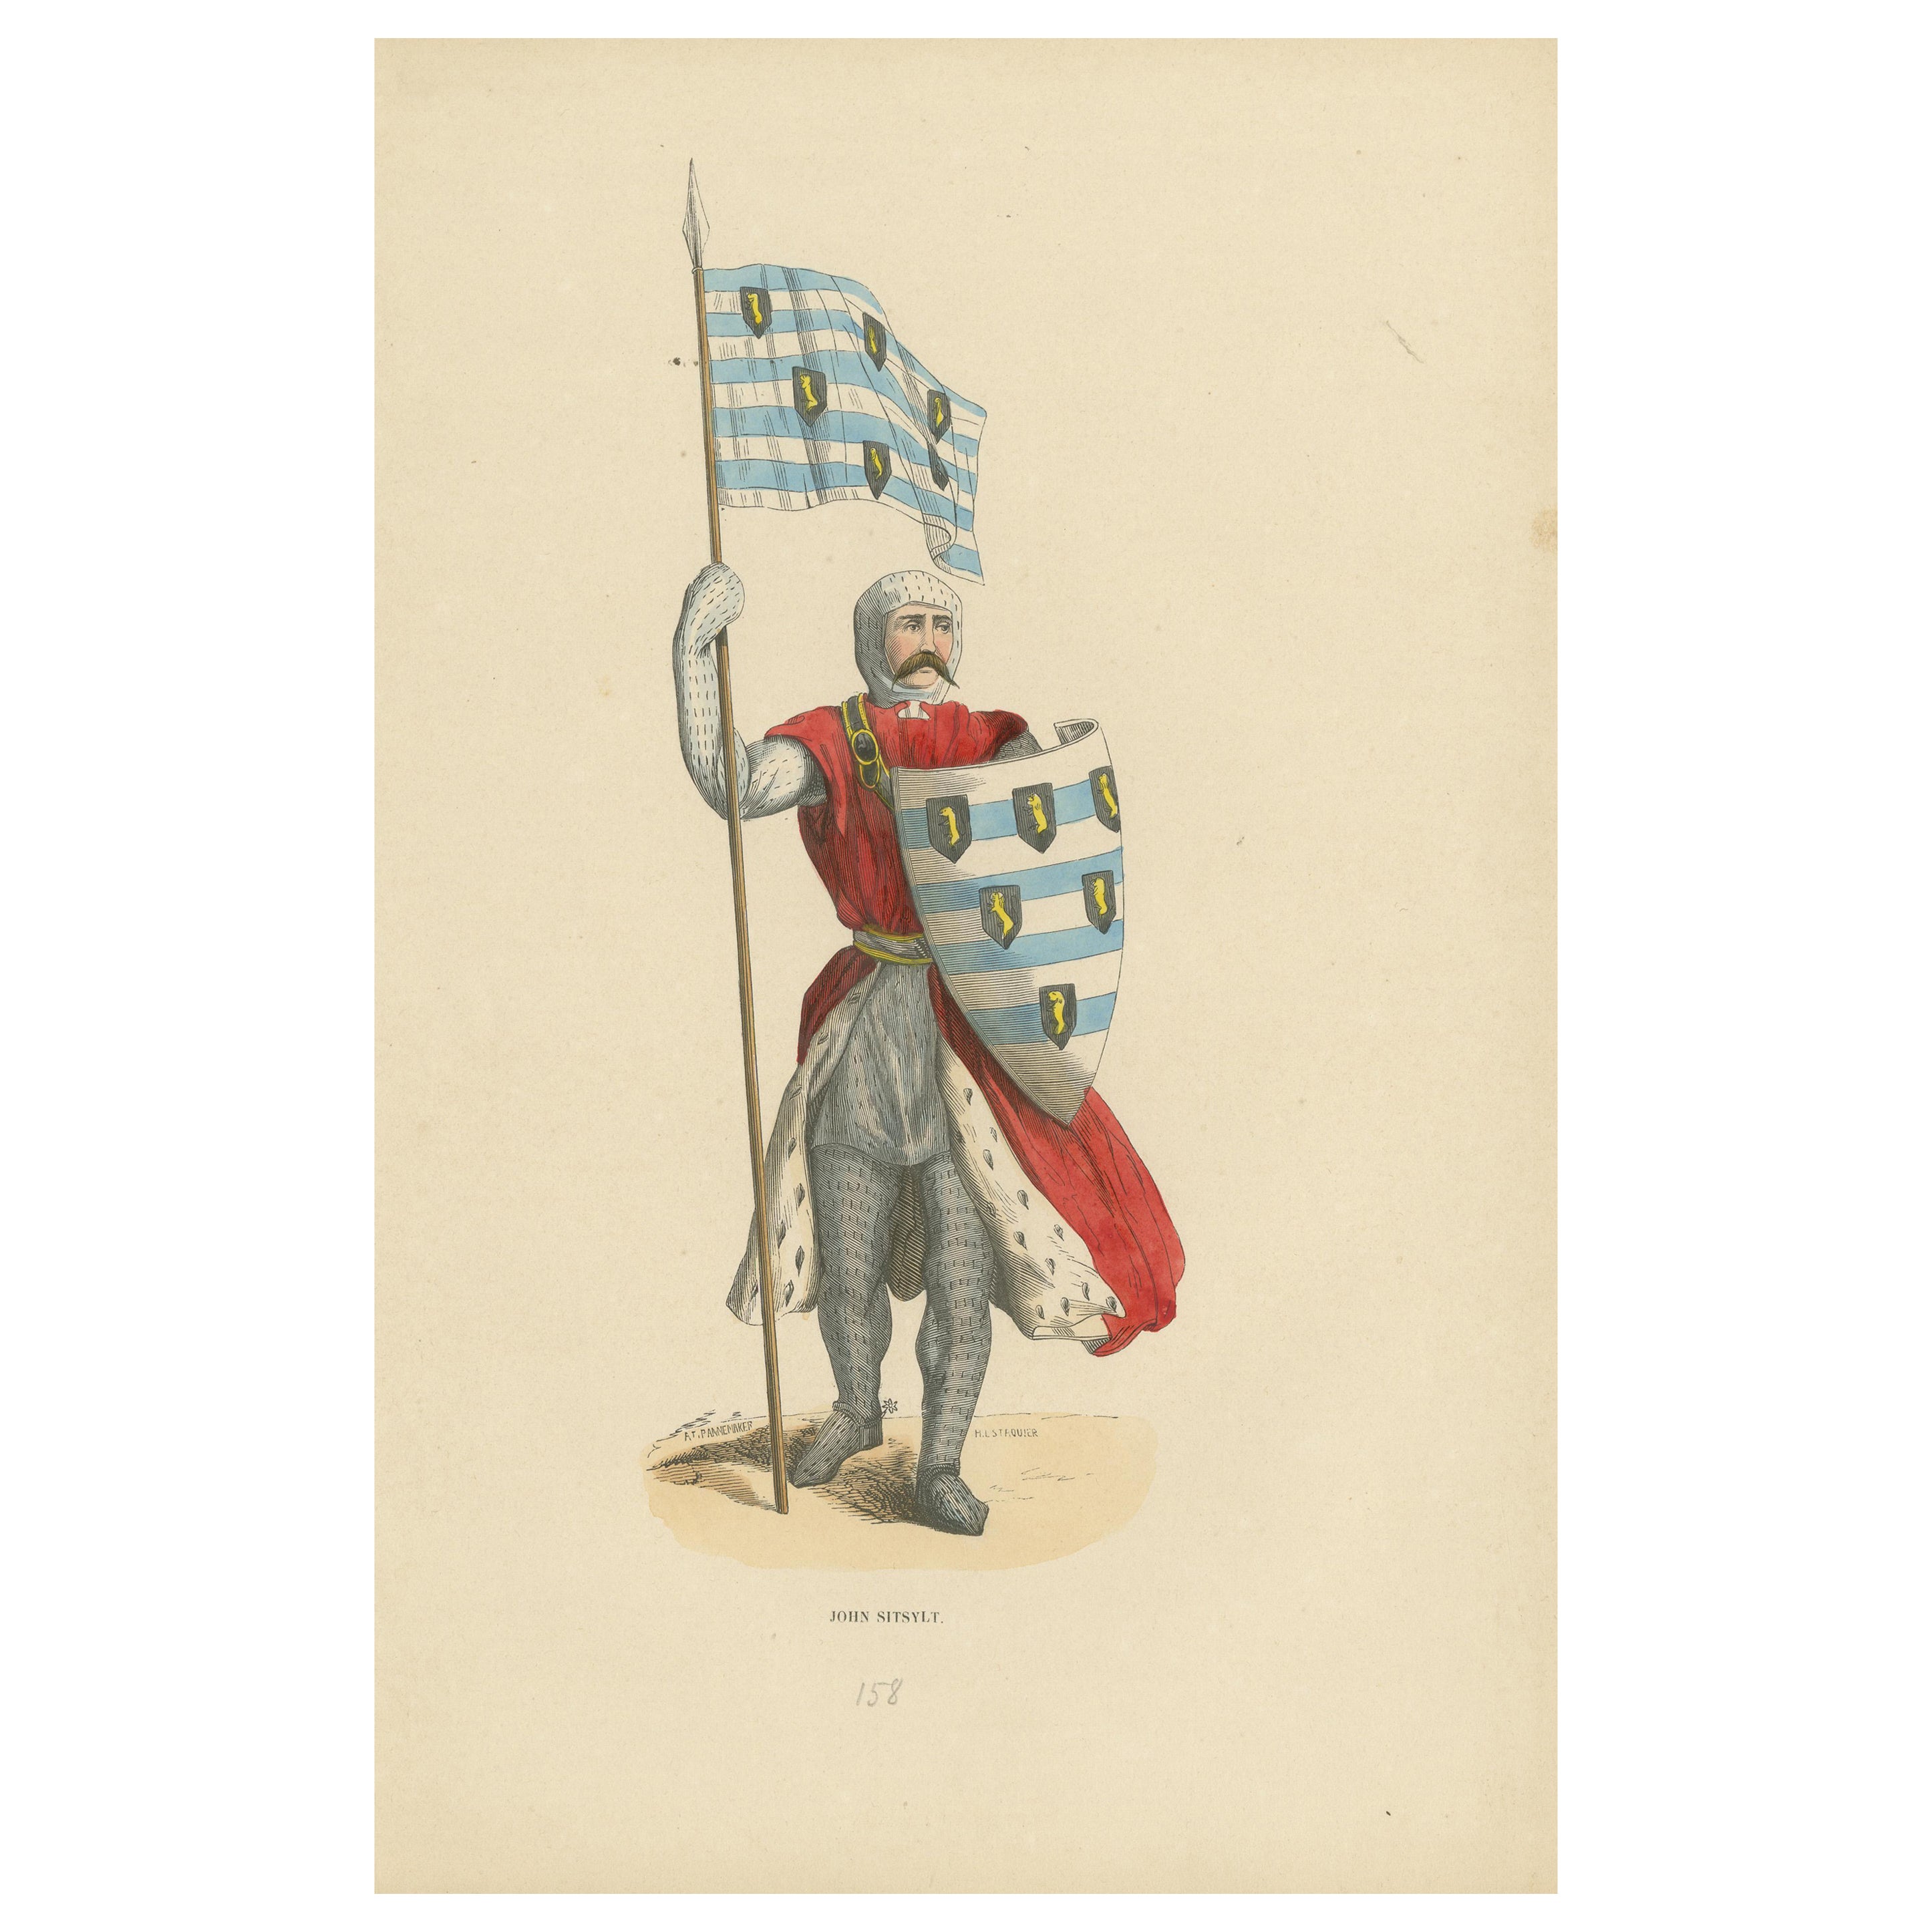 John Sitsylt, the Heraldic Knight in an Original Hand-Colored Lithograph of 1847 For Sale